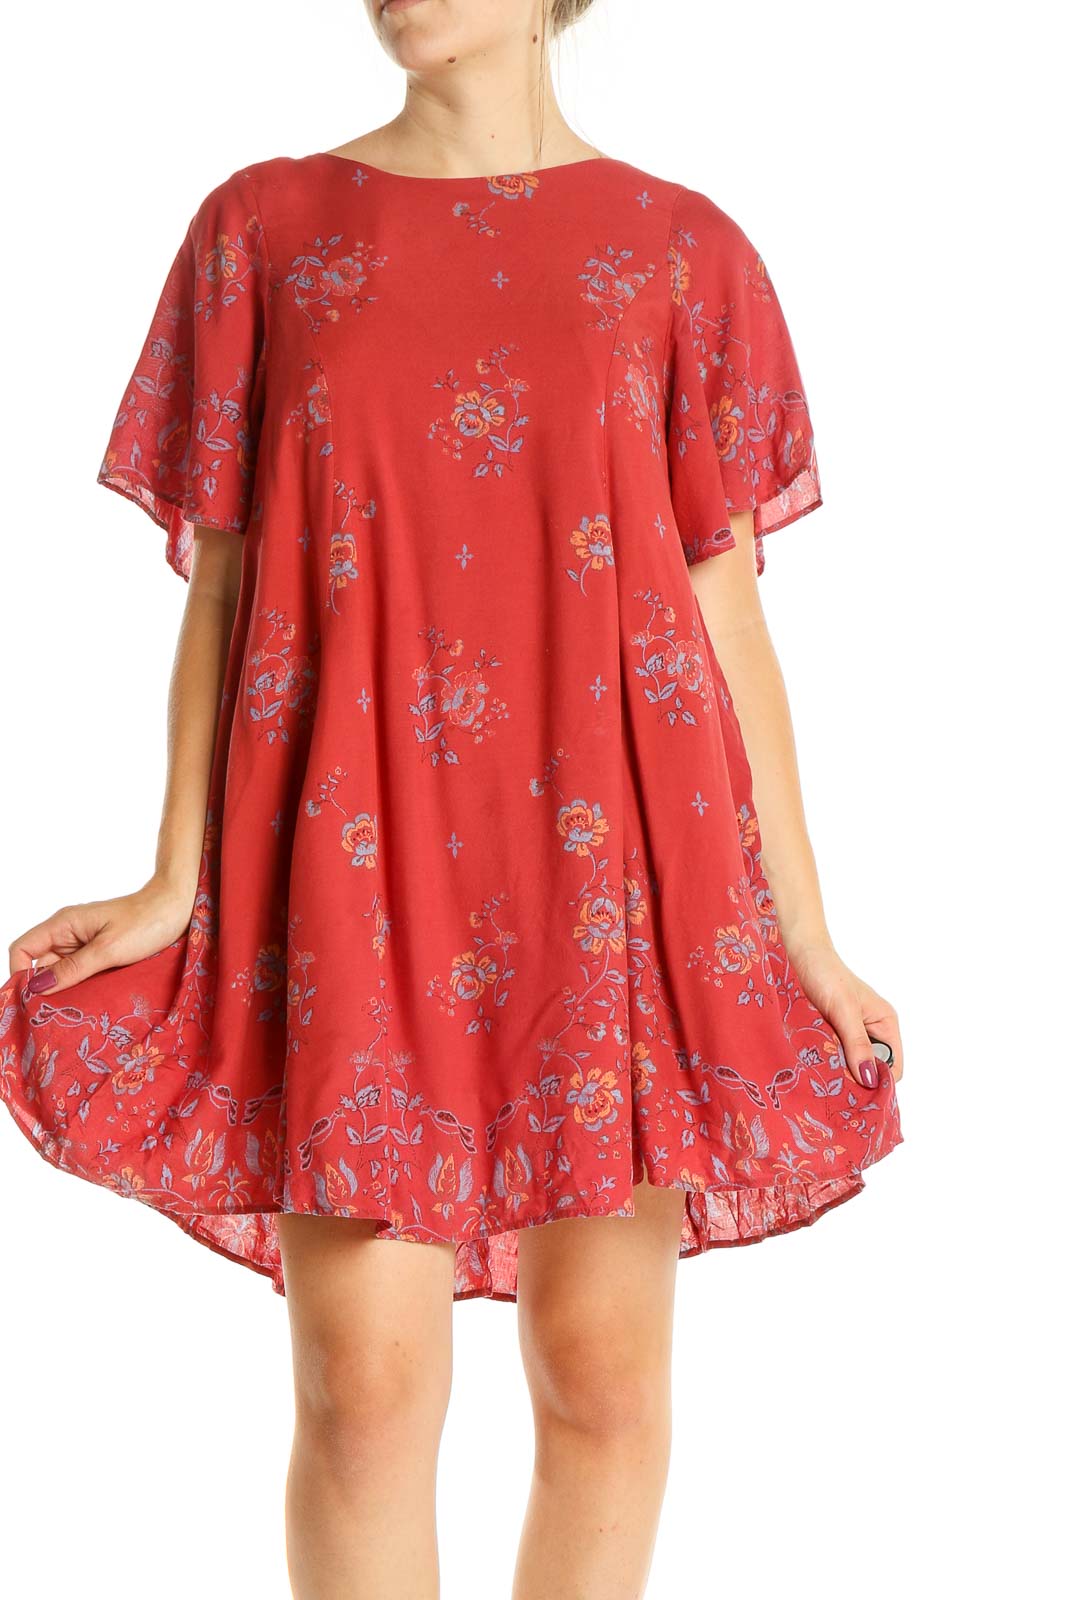 Red Floral Print Bohemian Babydoll Dress Front